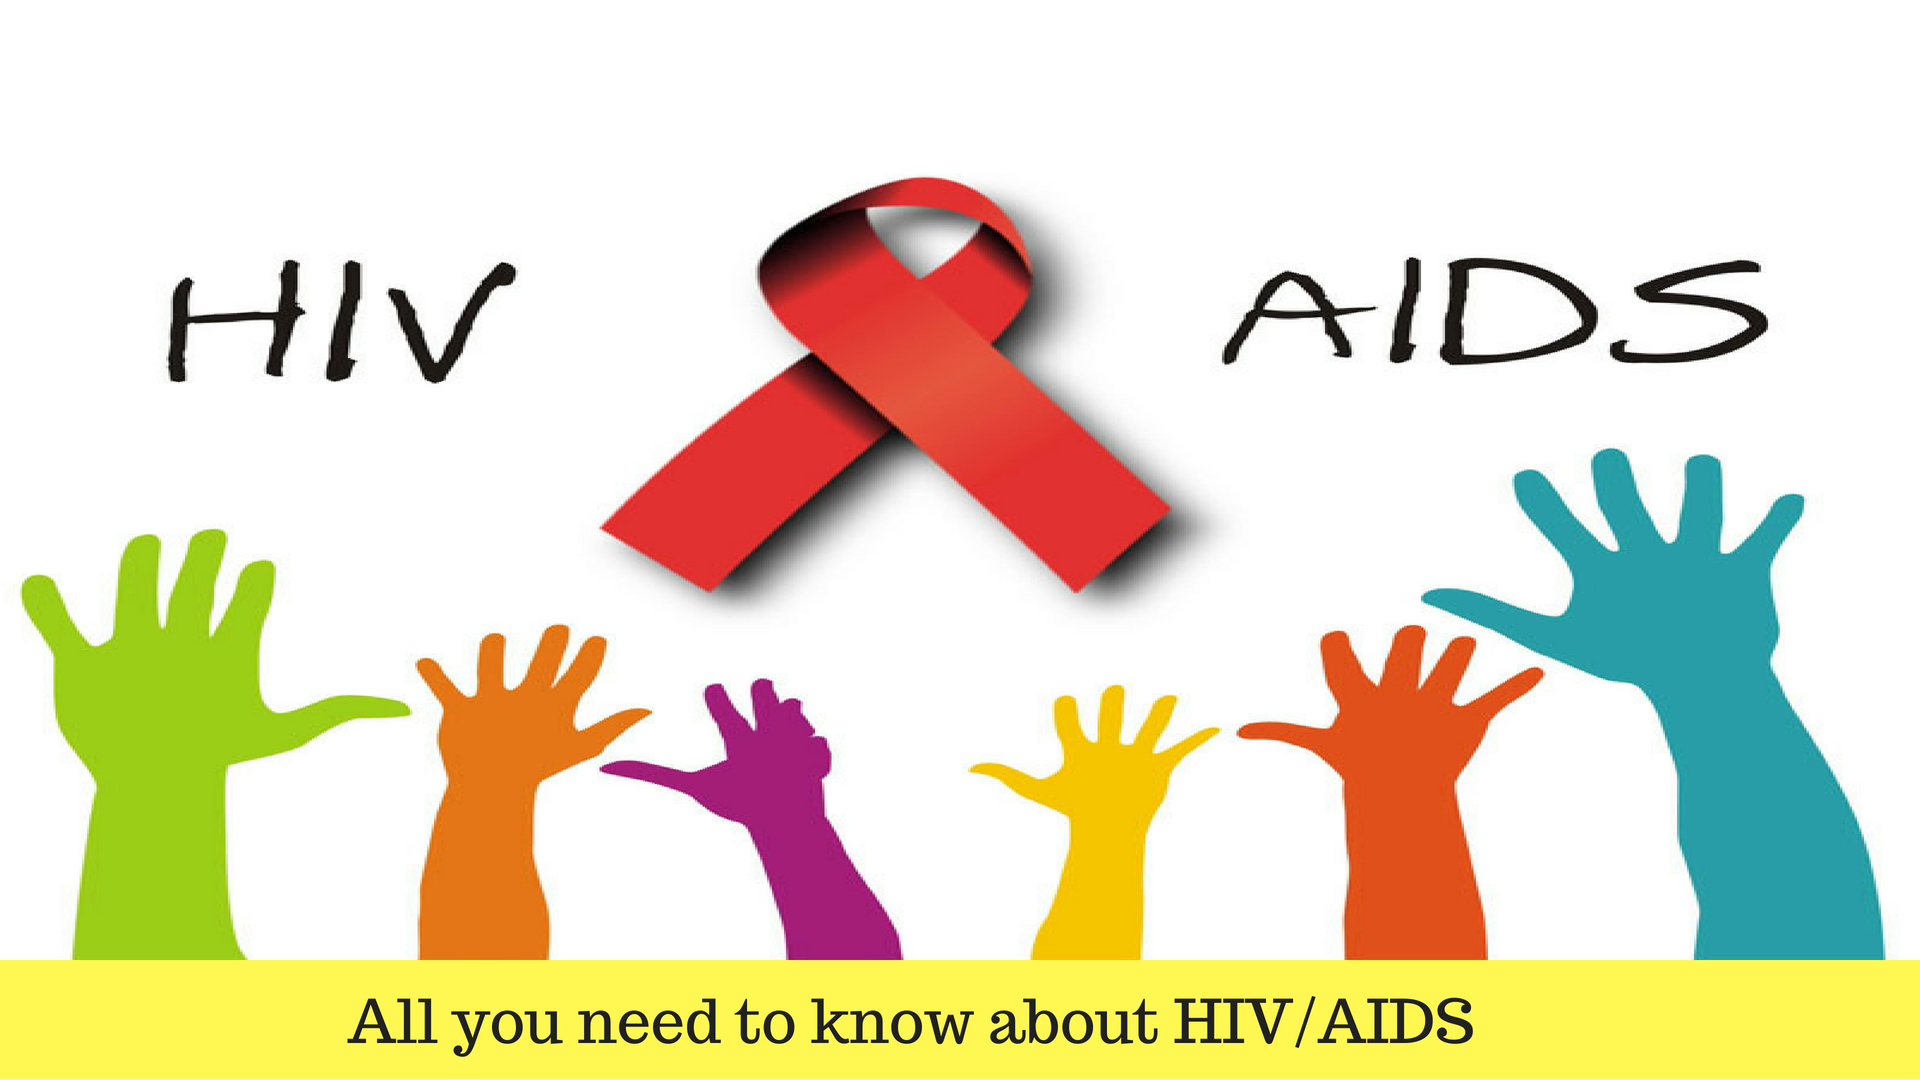 ll you need to know about HIV AIDS